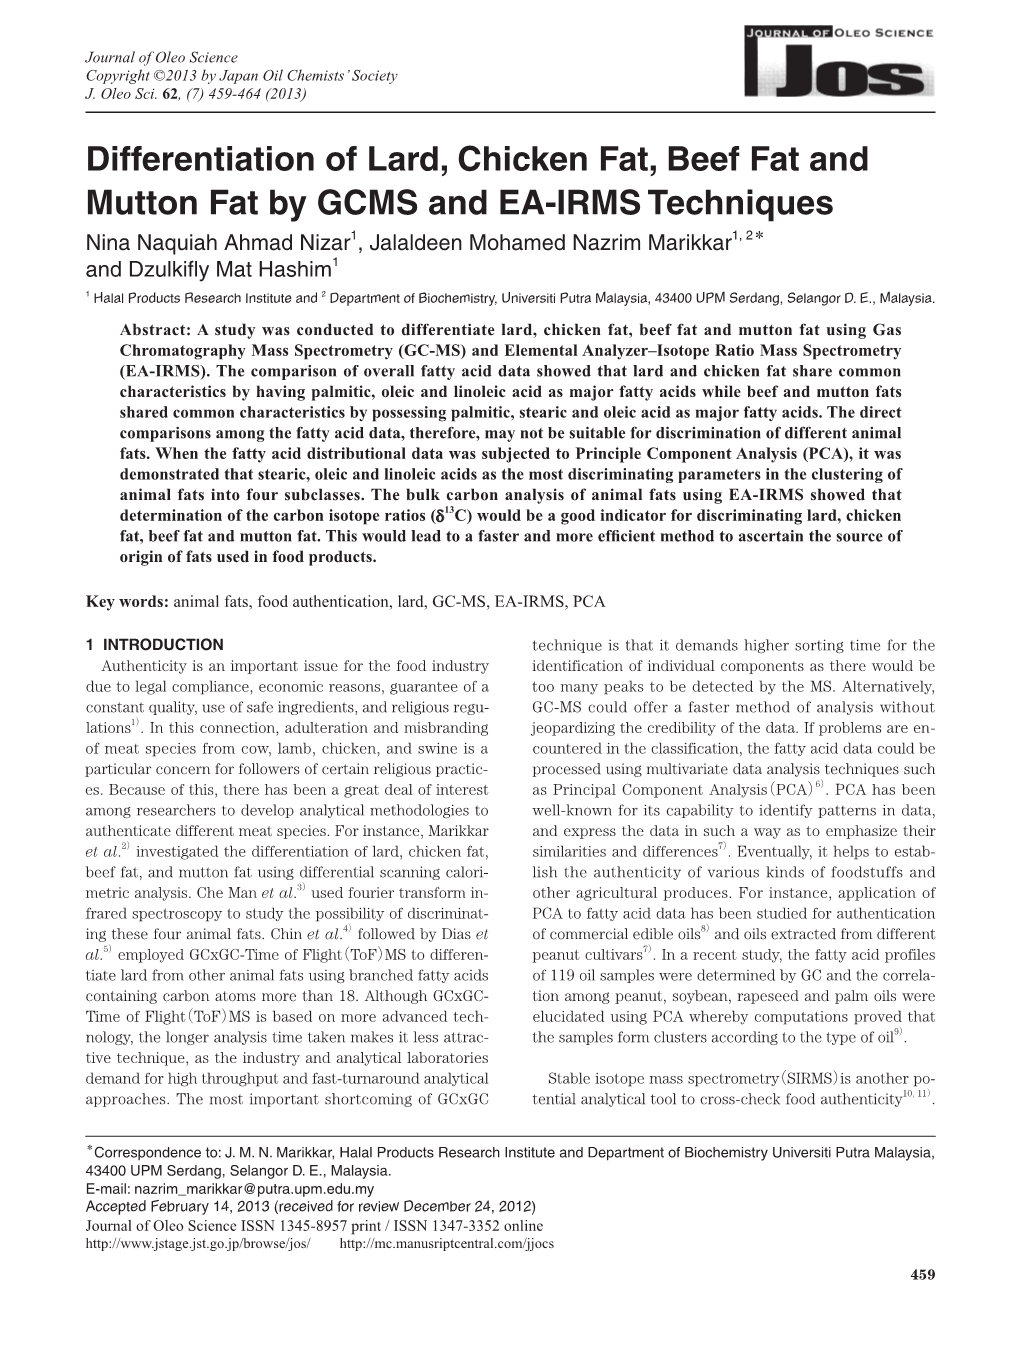 Differentiation of Lard, Chicken Fat, Beef Fat and Mutton Fat by GCMS